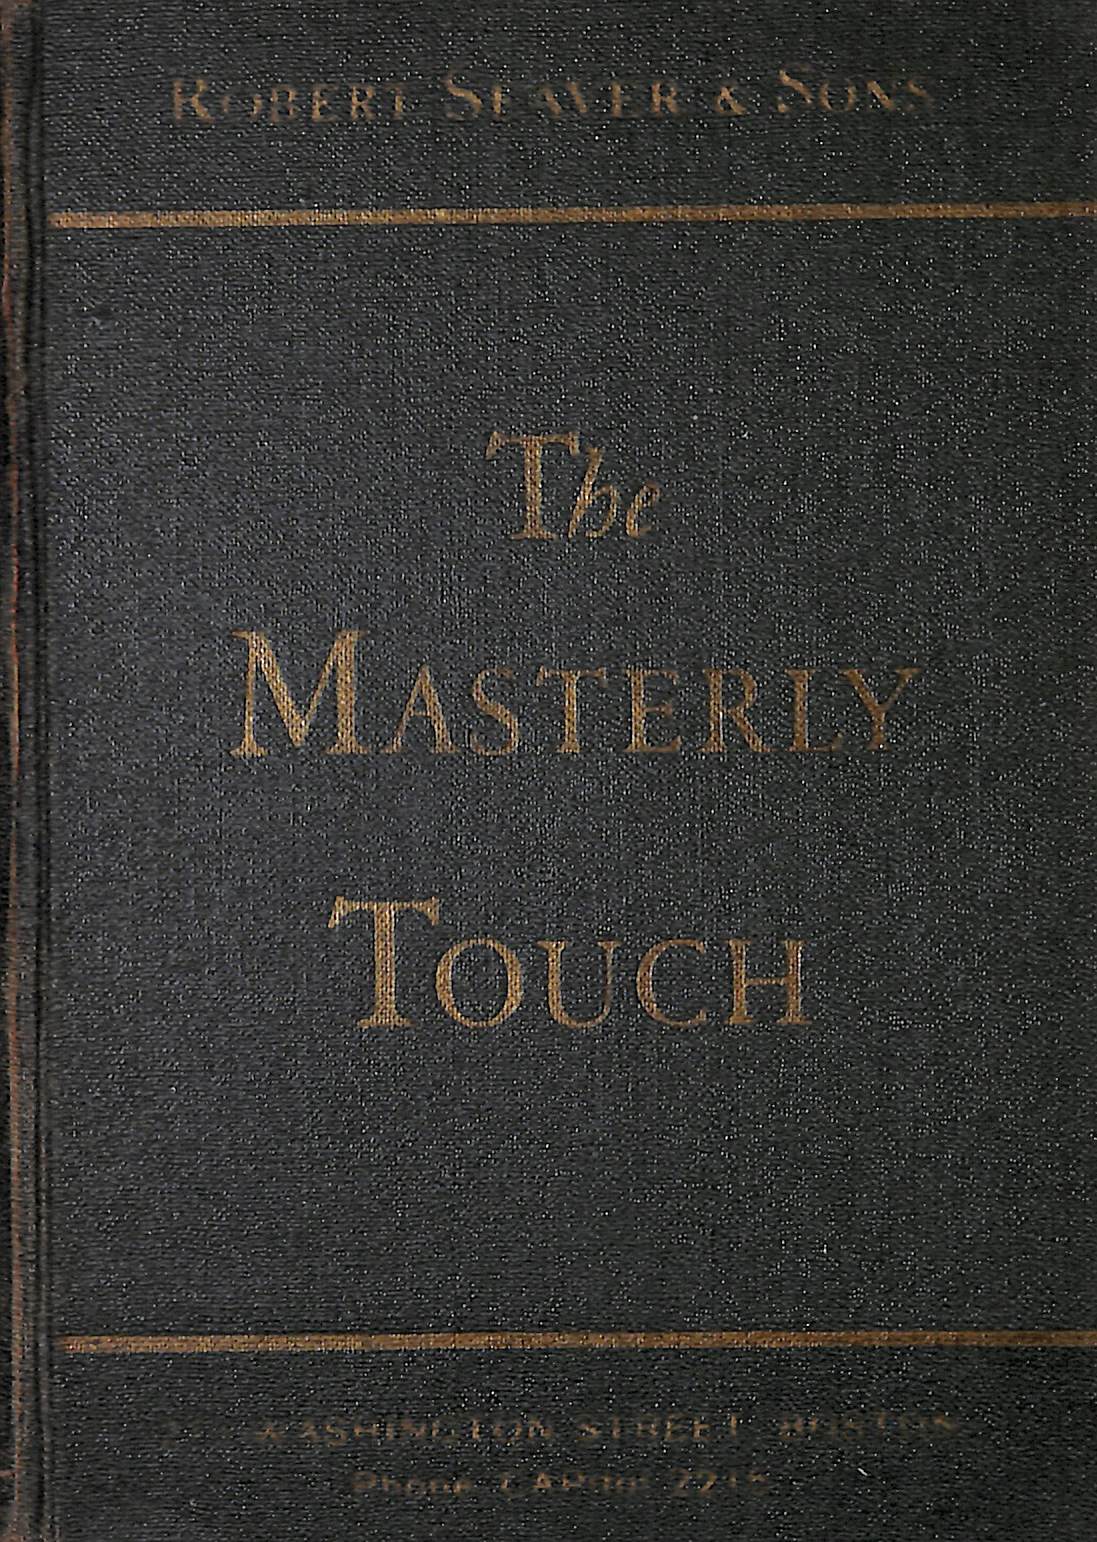 "The Masterly Touch" 1934